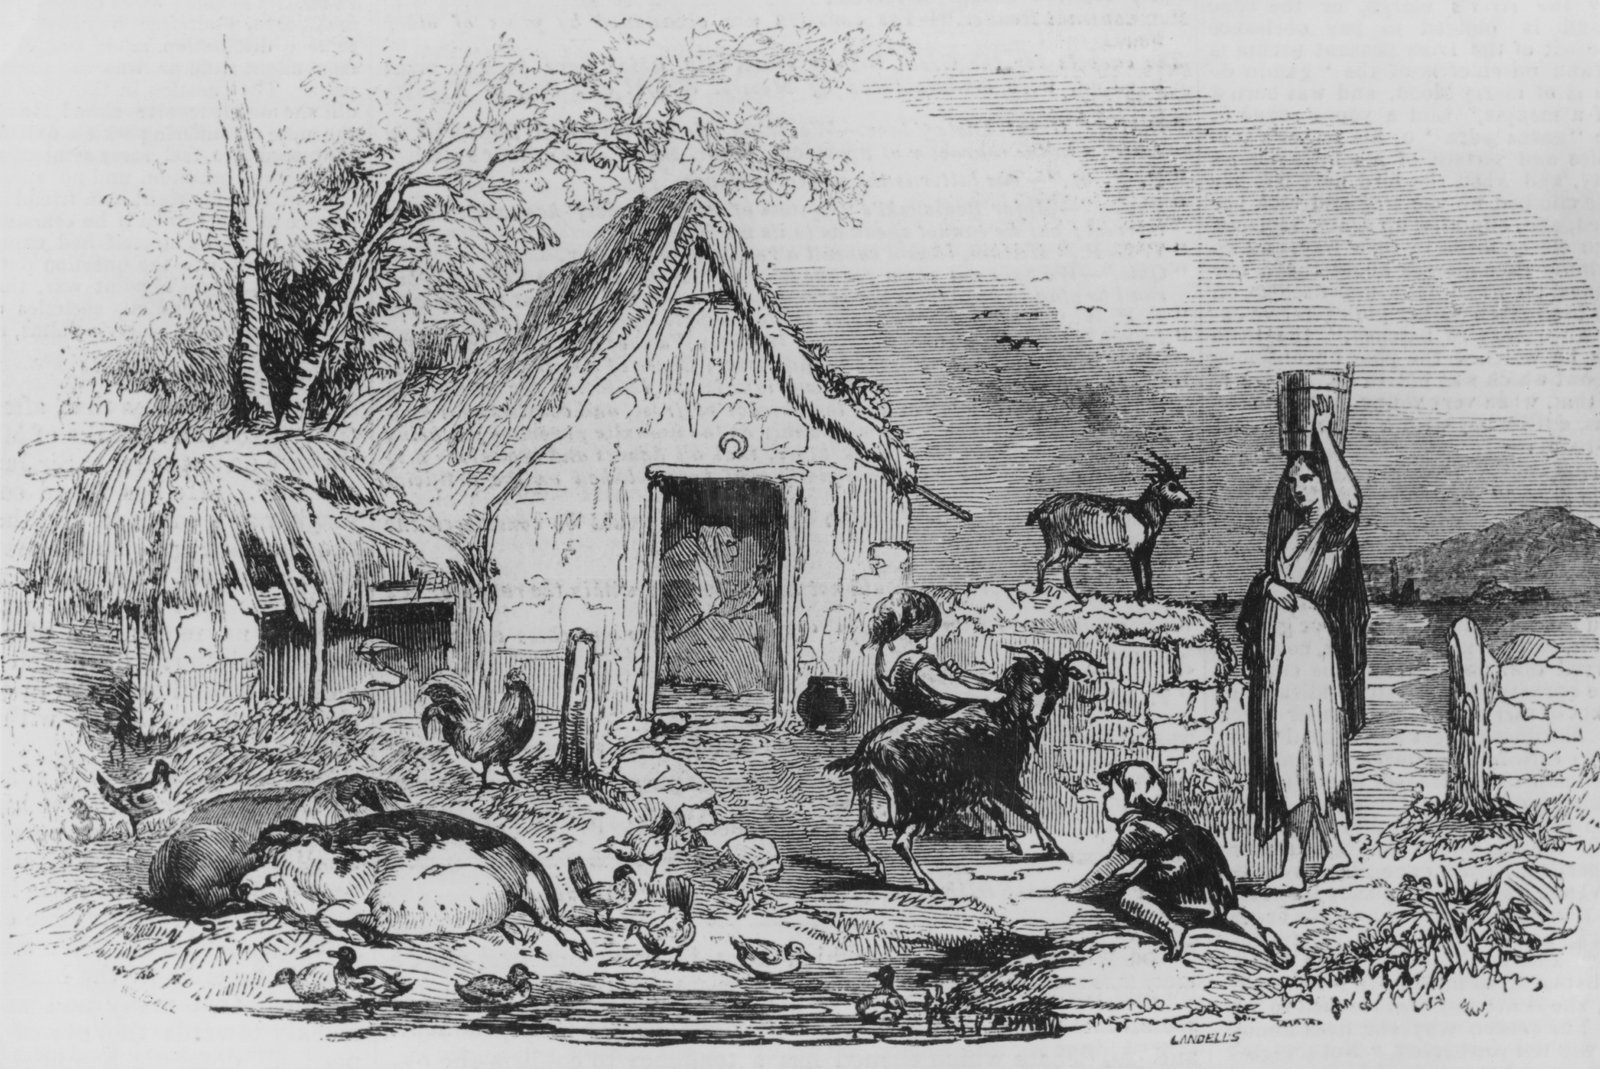 Image - A woman and children with their livestock outside a peasant dwelling in Leinster in 1843. Originally published in the Illustrated London News, 12th August 1843. Source: Illustrated London News/Hulton Archive/Getty Images